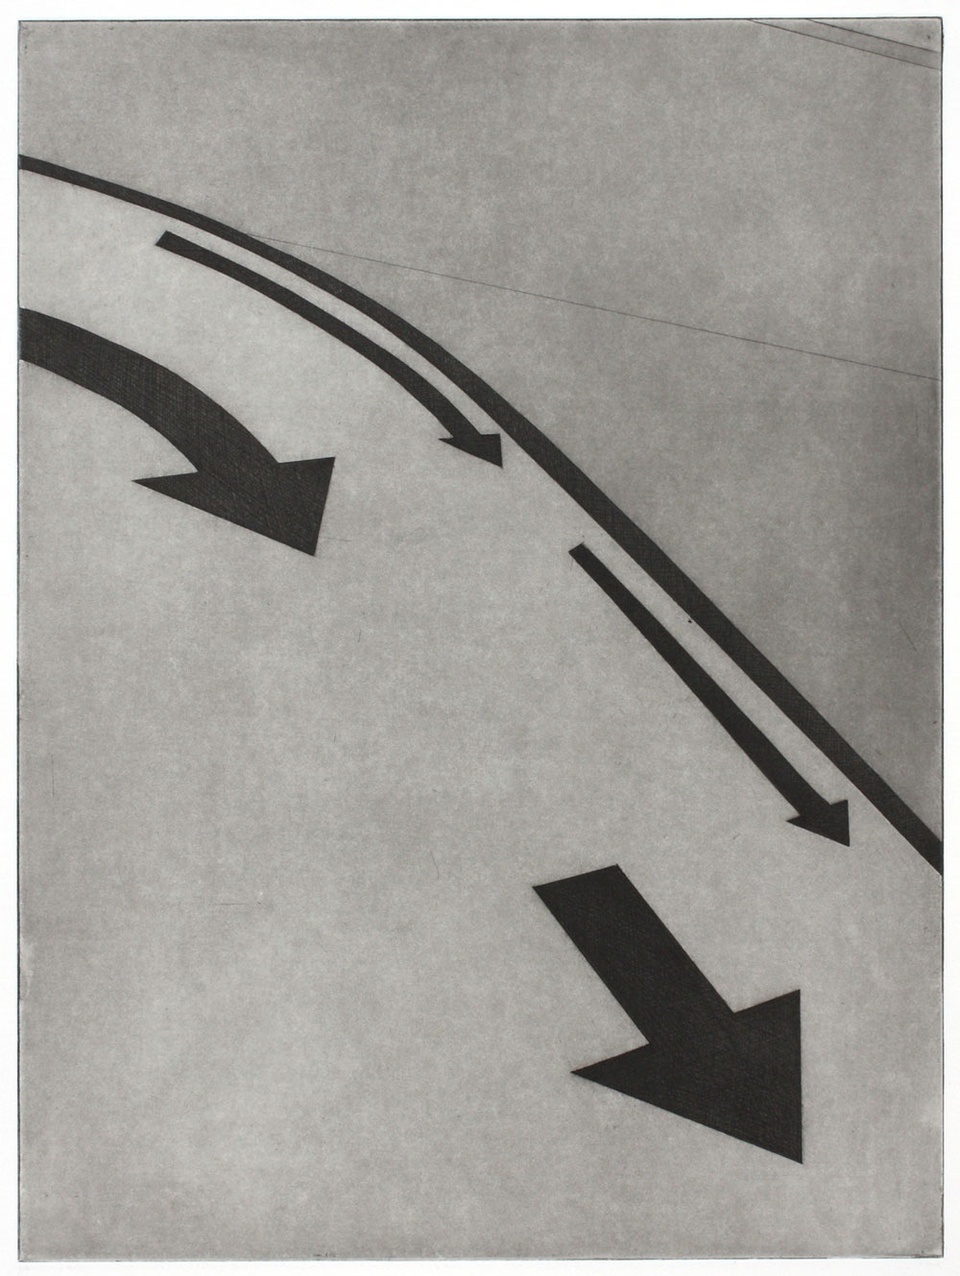 Image of four black downward pointing arrows curving towards the bottom right of the composition against a gray background